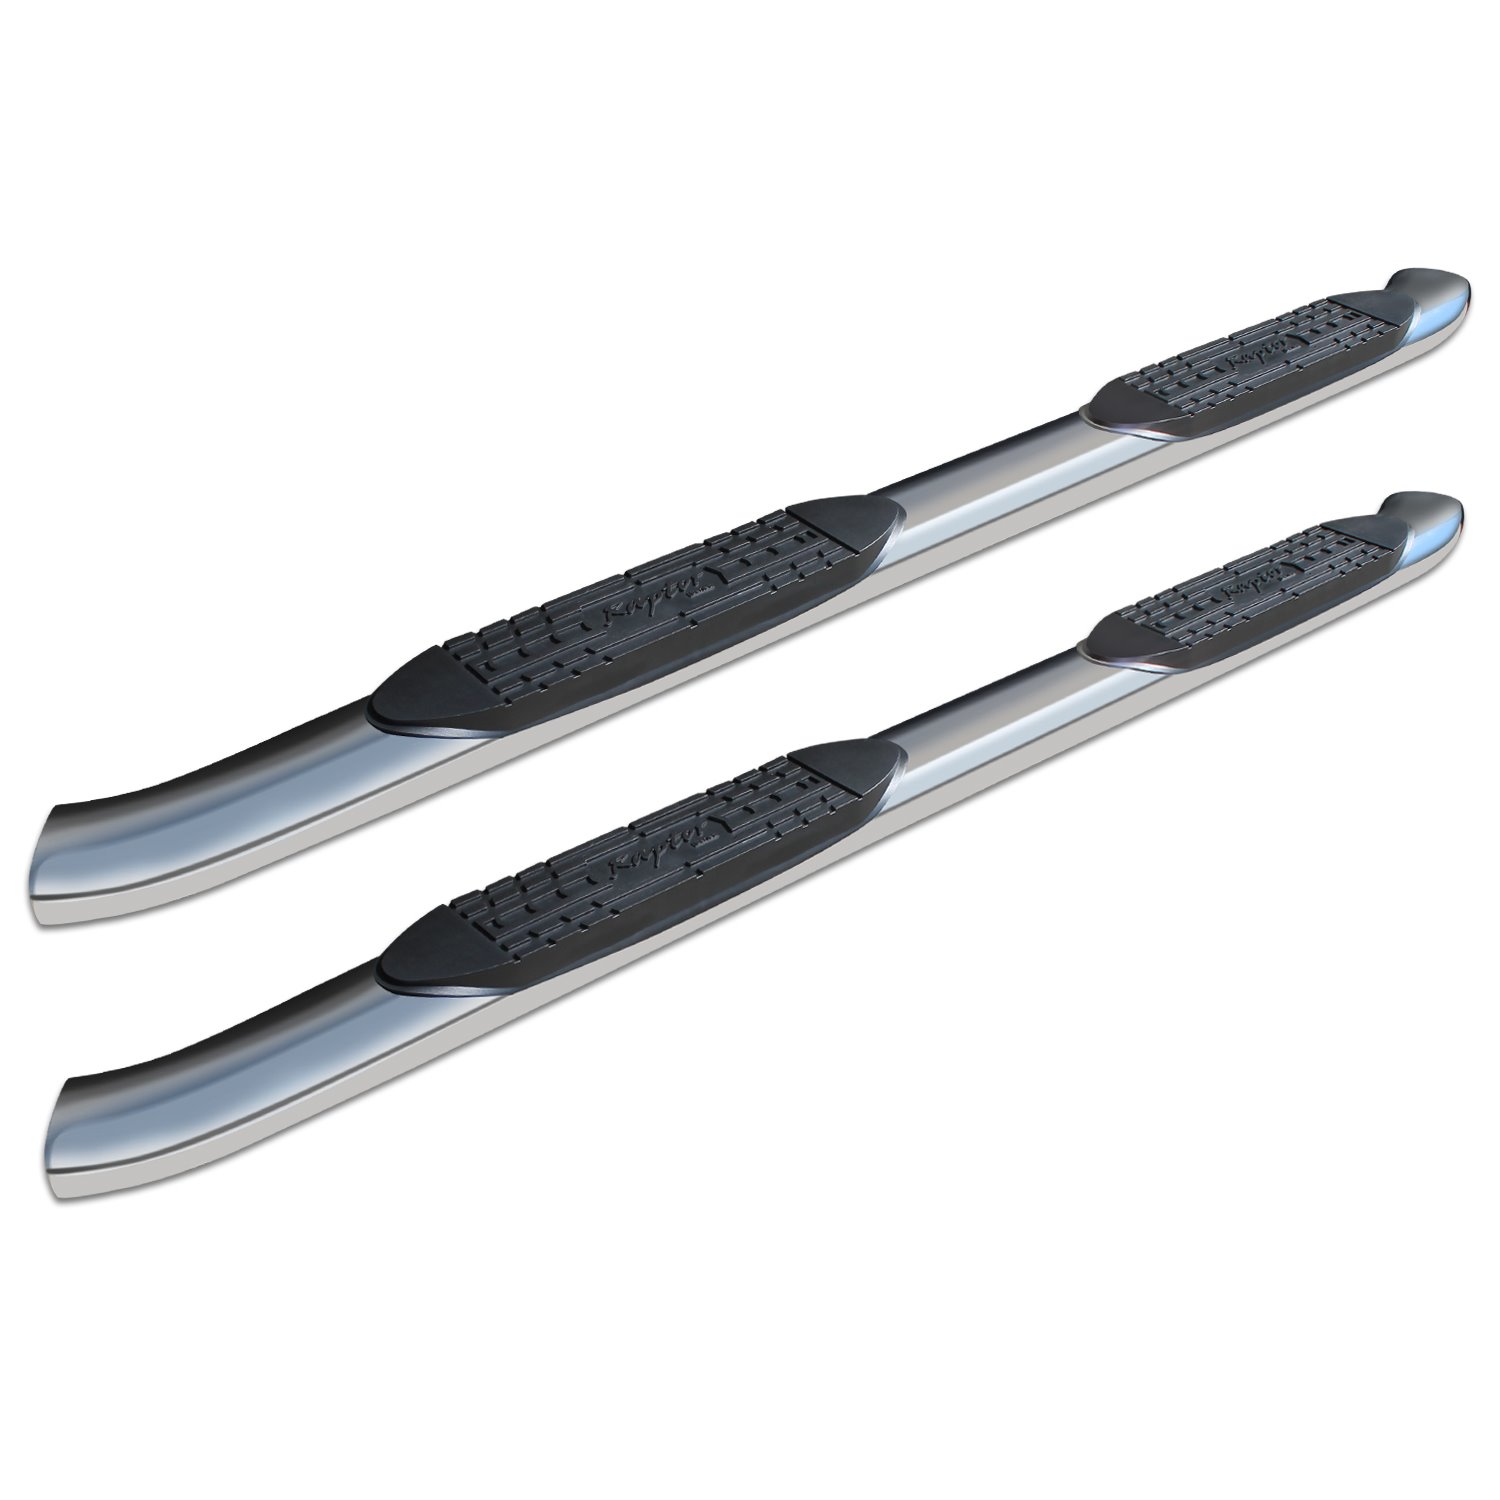 1602-0291M 5 in OE Style Curved Oval Steps, Polished Steel, Fits Select Dodge/Ram 1500/2500/3500